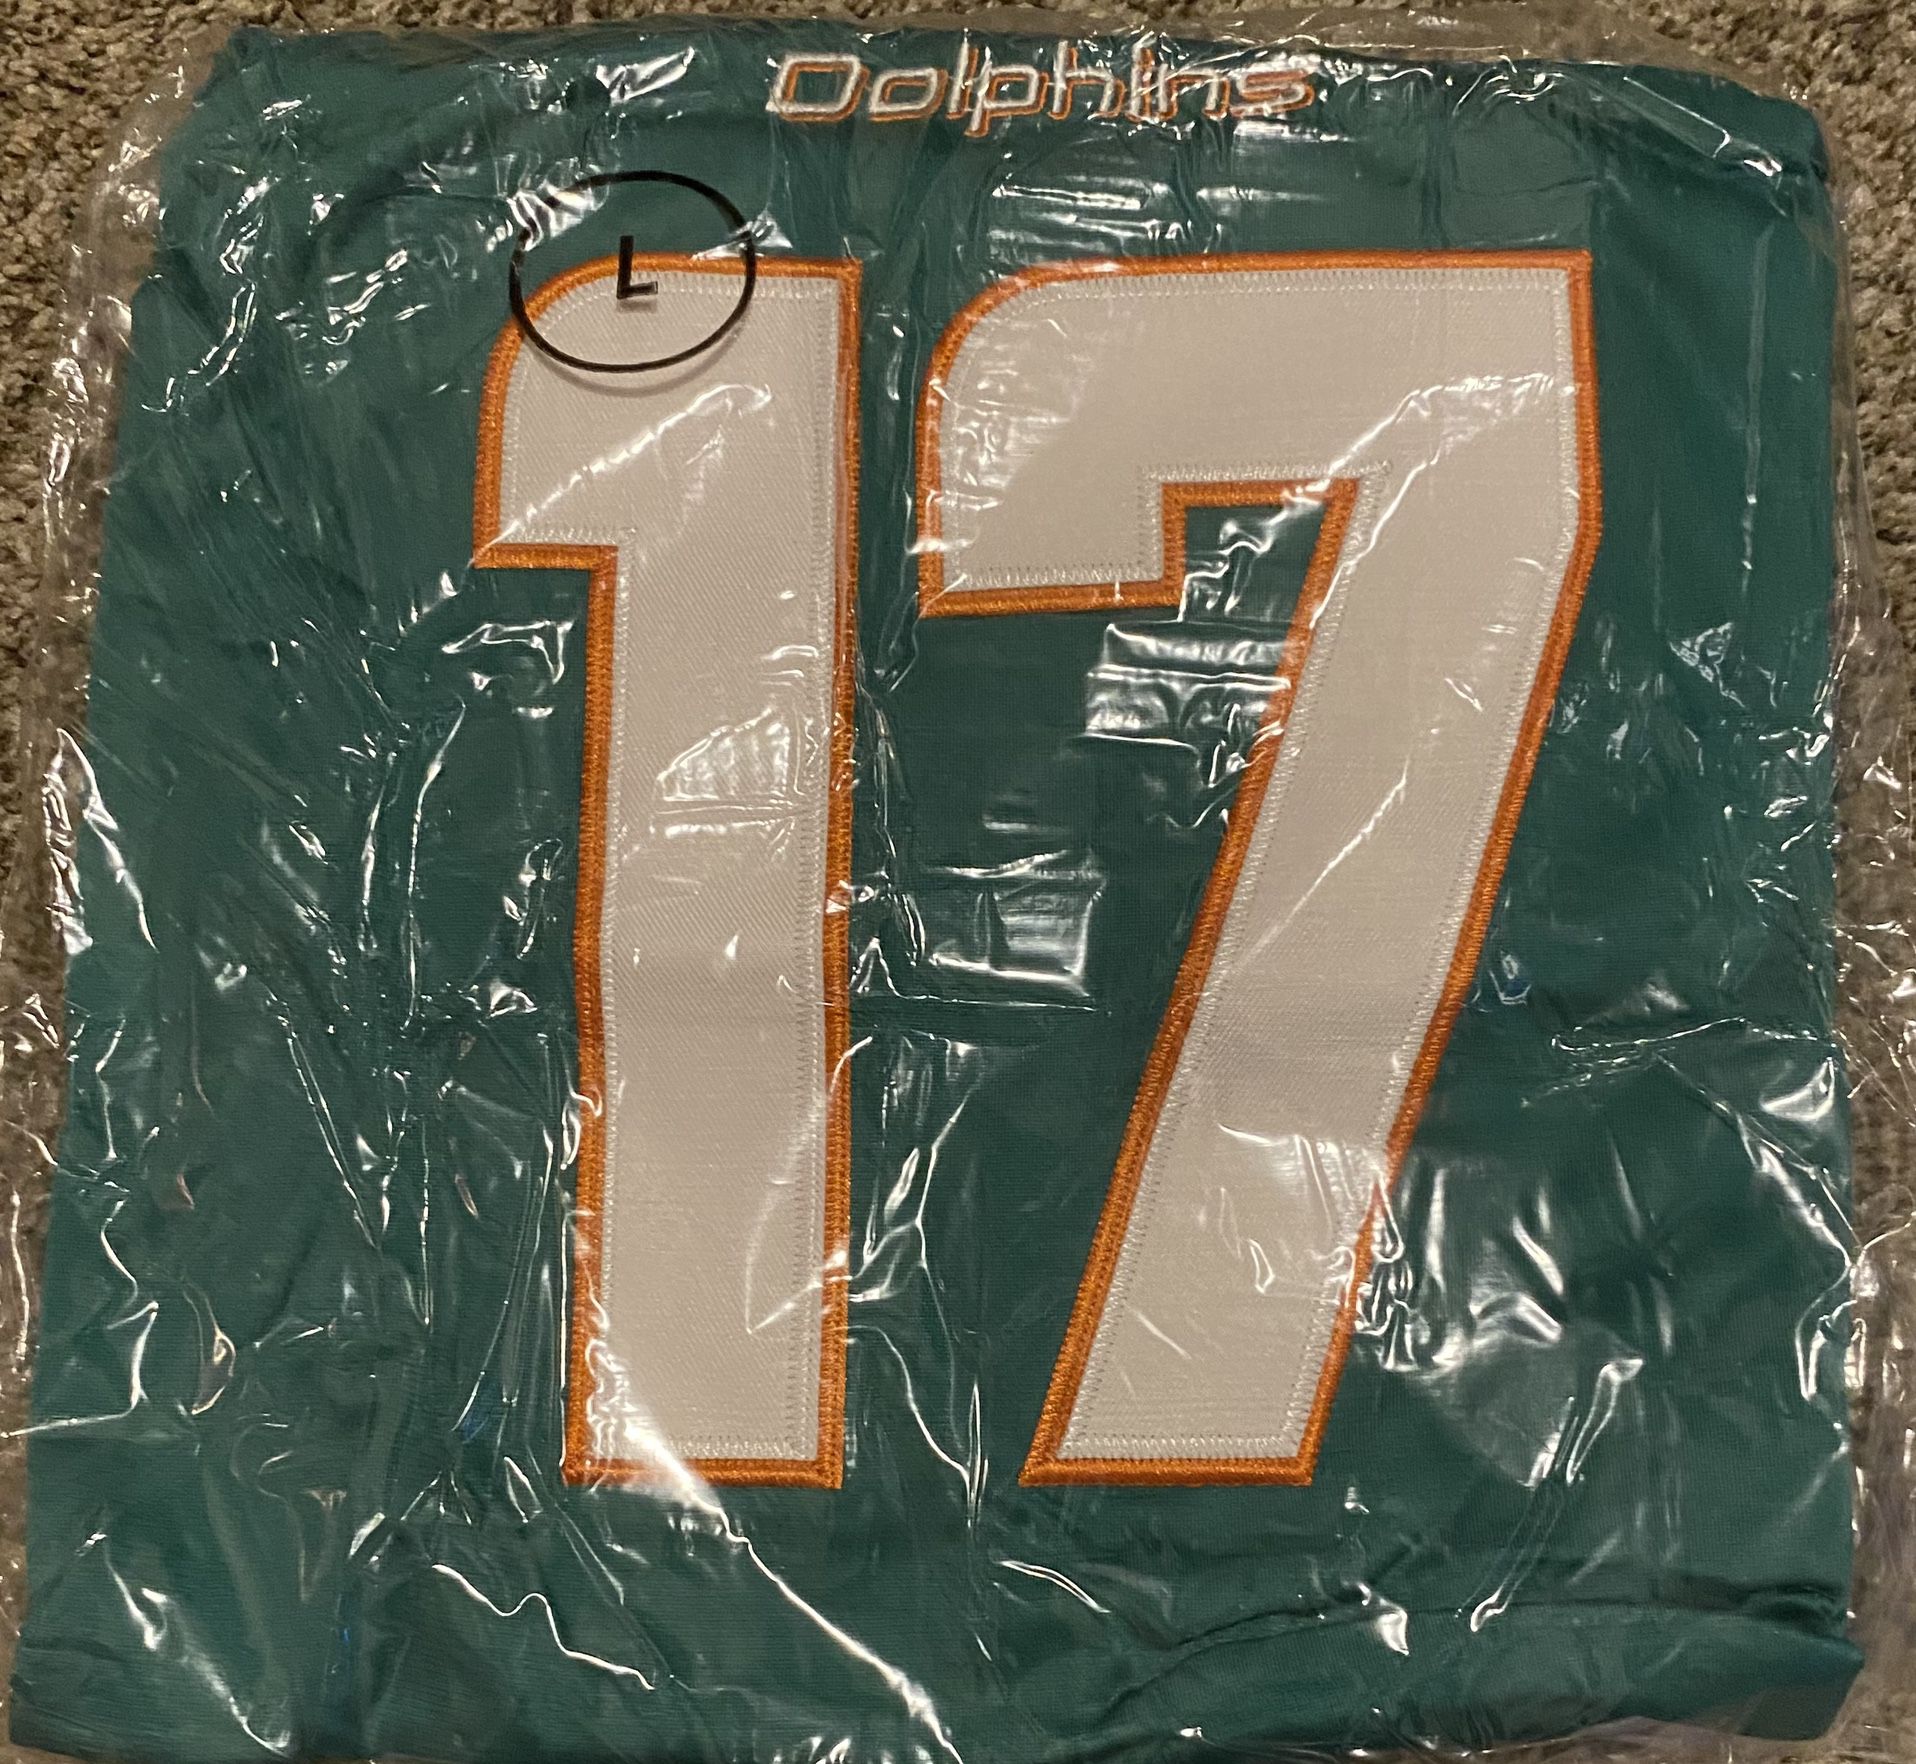 embroidered nfl jersey